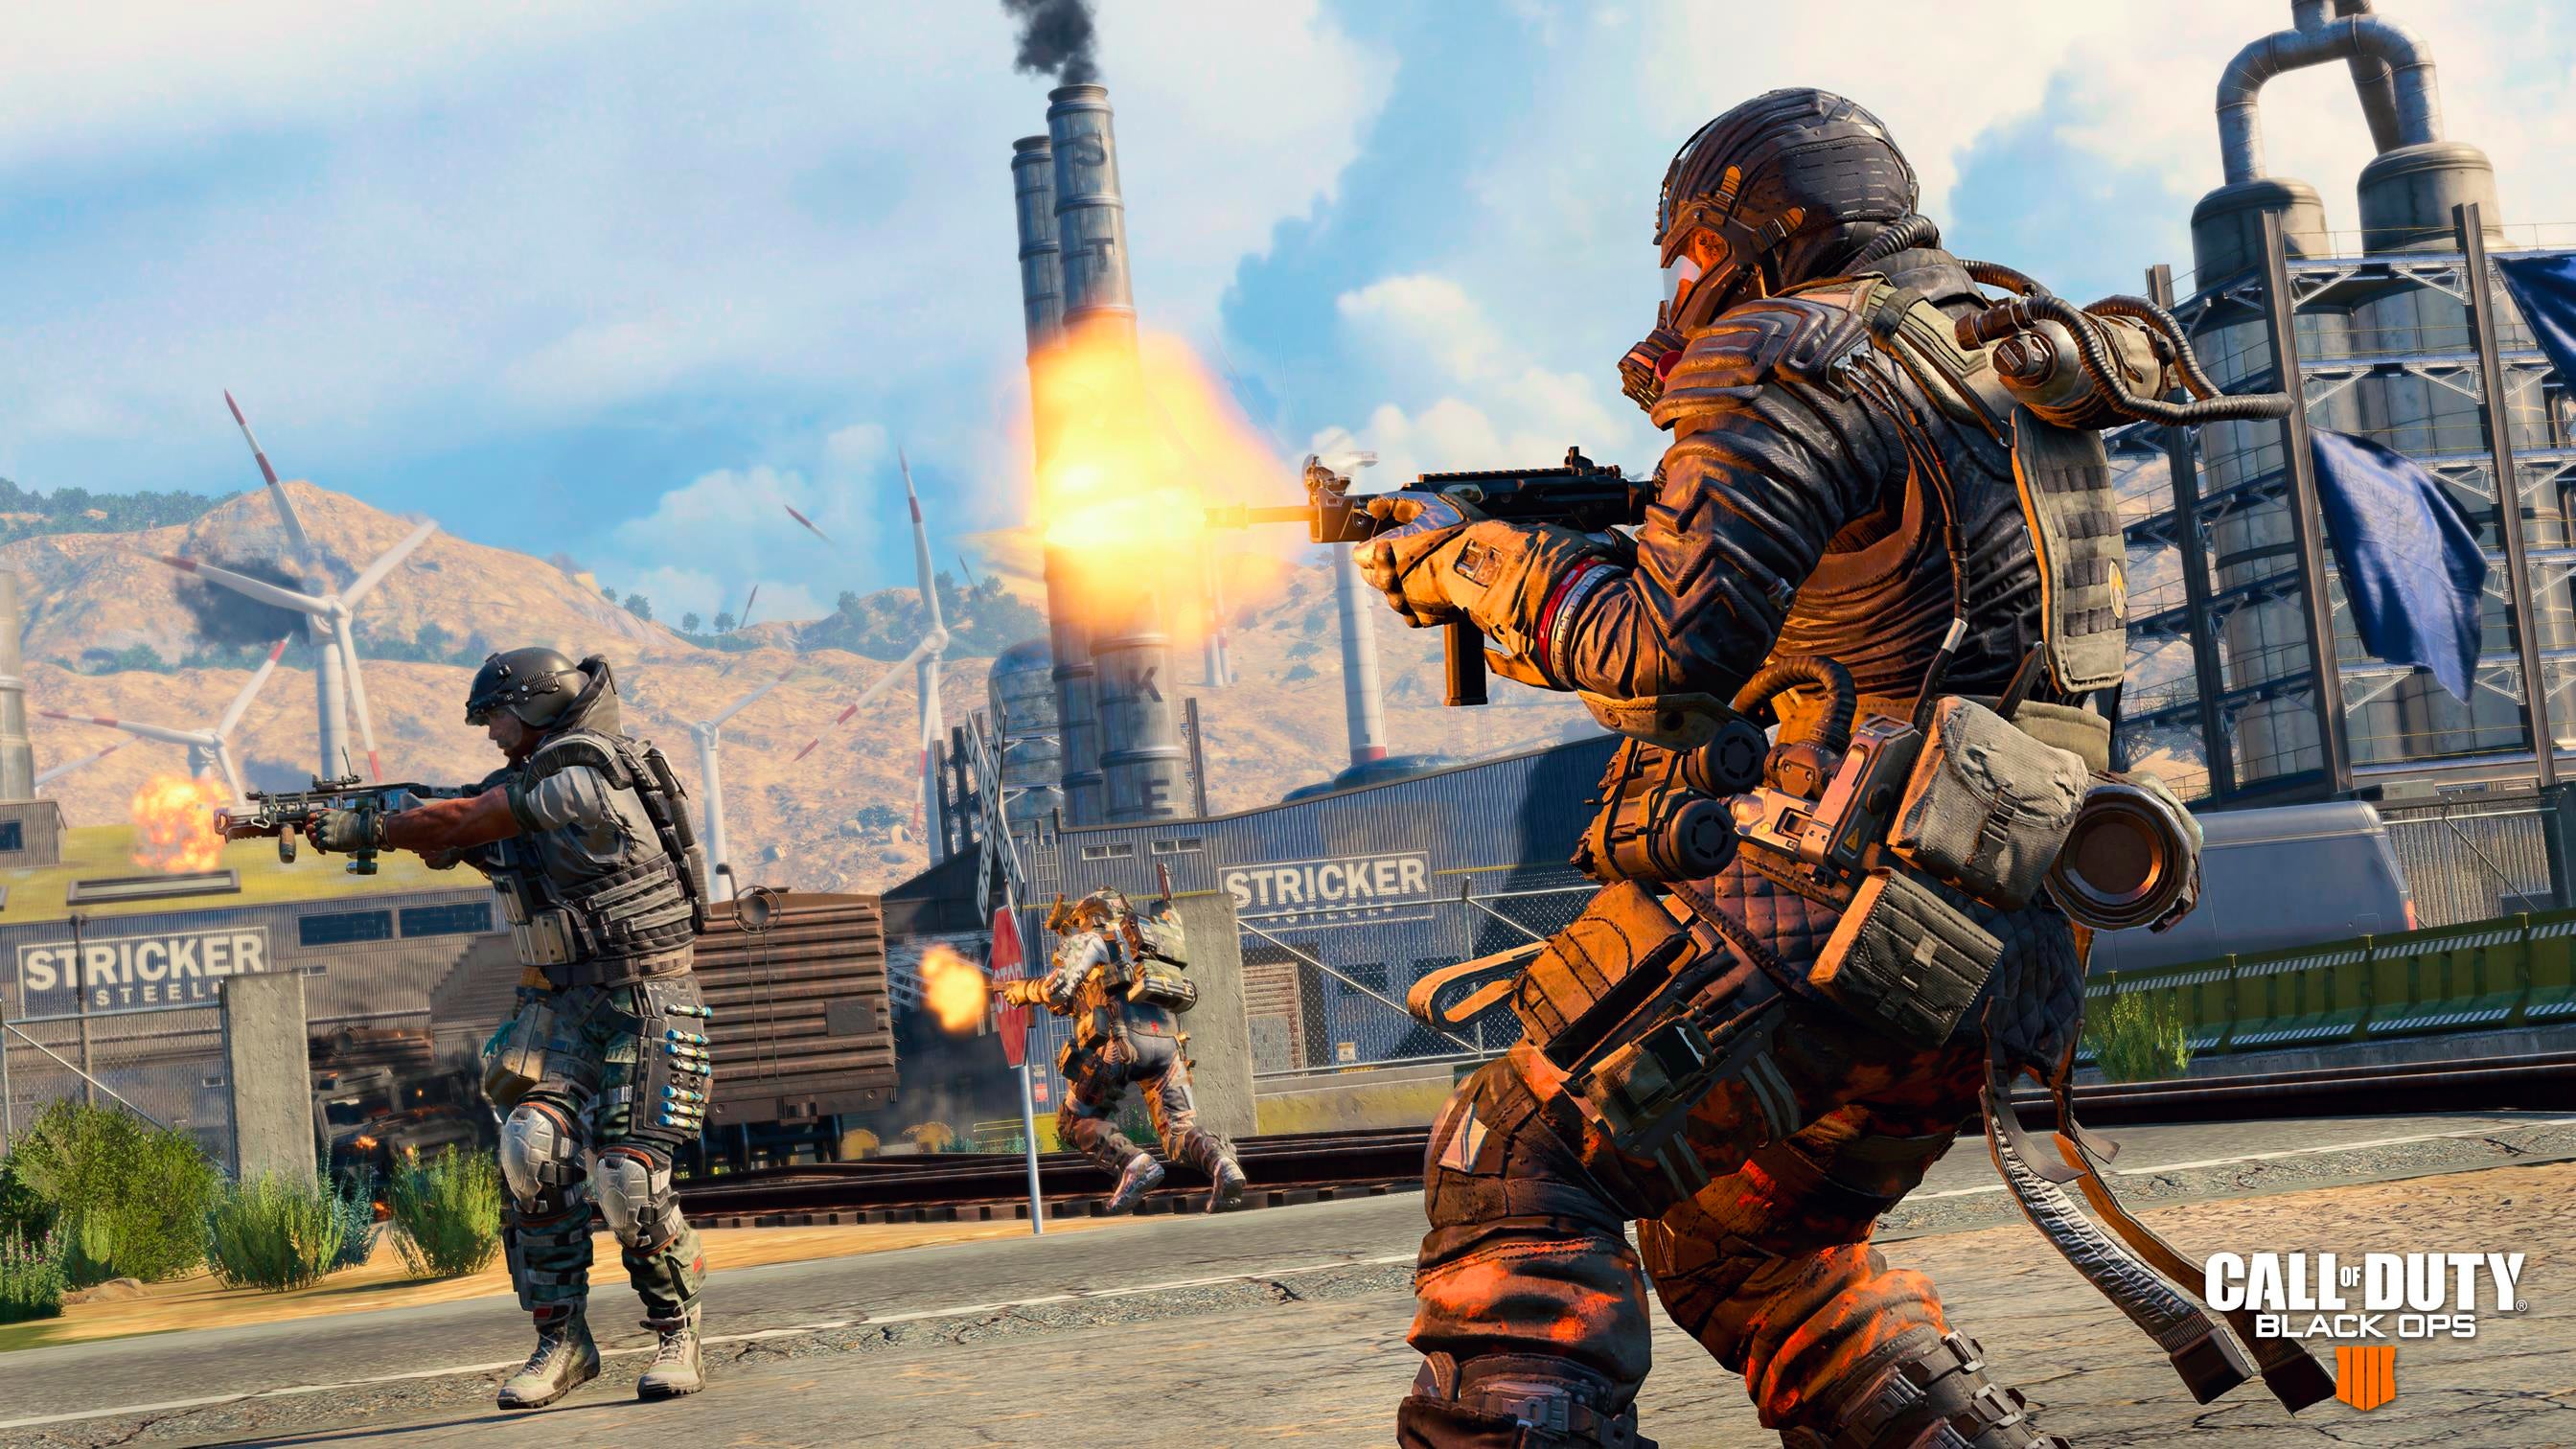 Image for Call of Duty: Black Ops 4 questions answered - how to use COD points, Dark Ops, splitscreen, Blackout offline and more